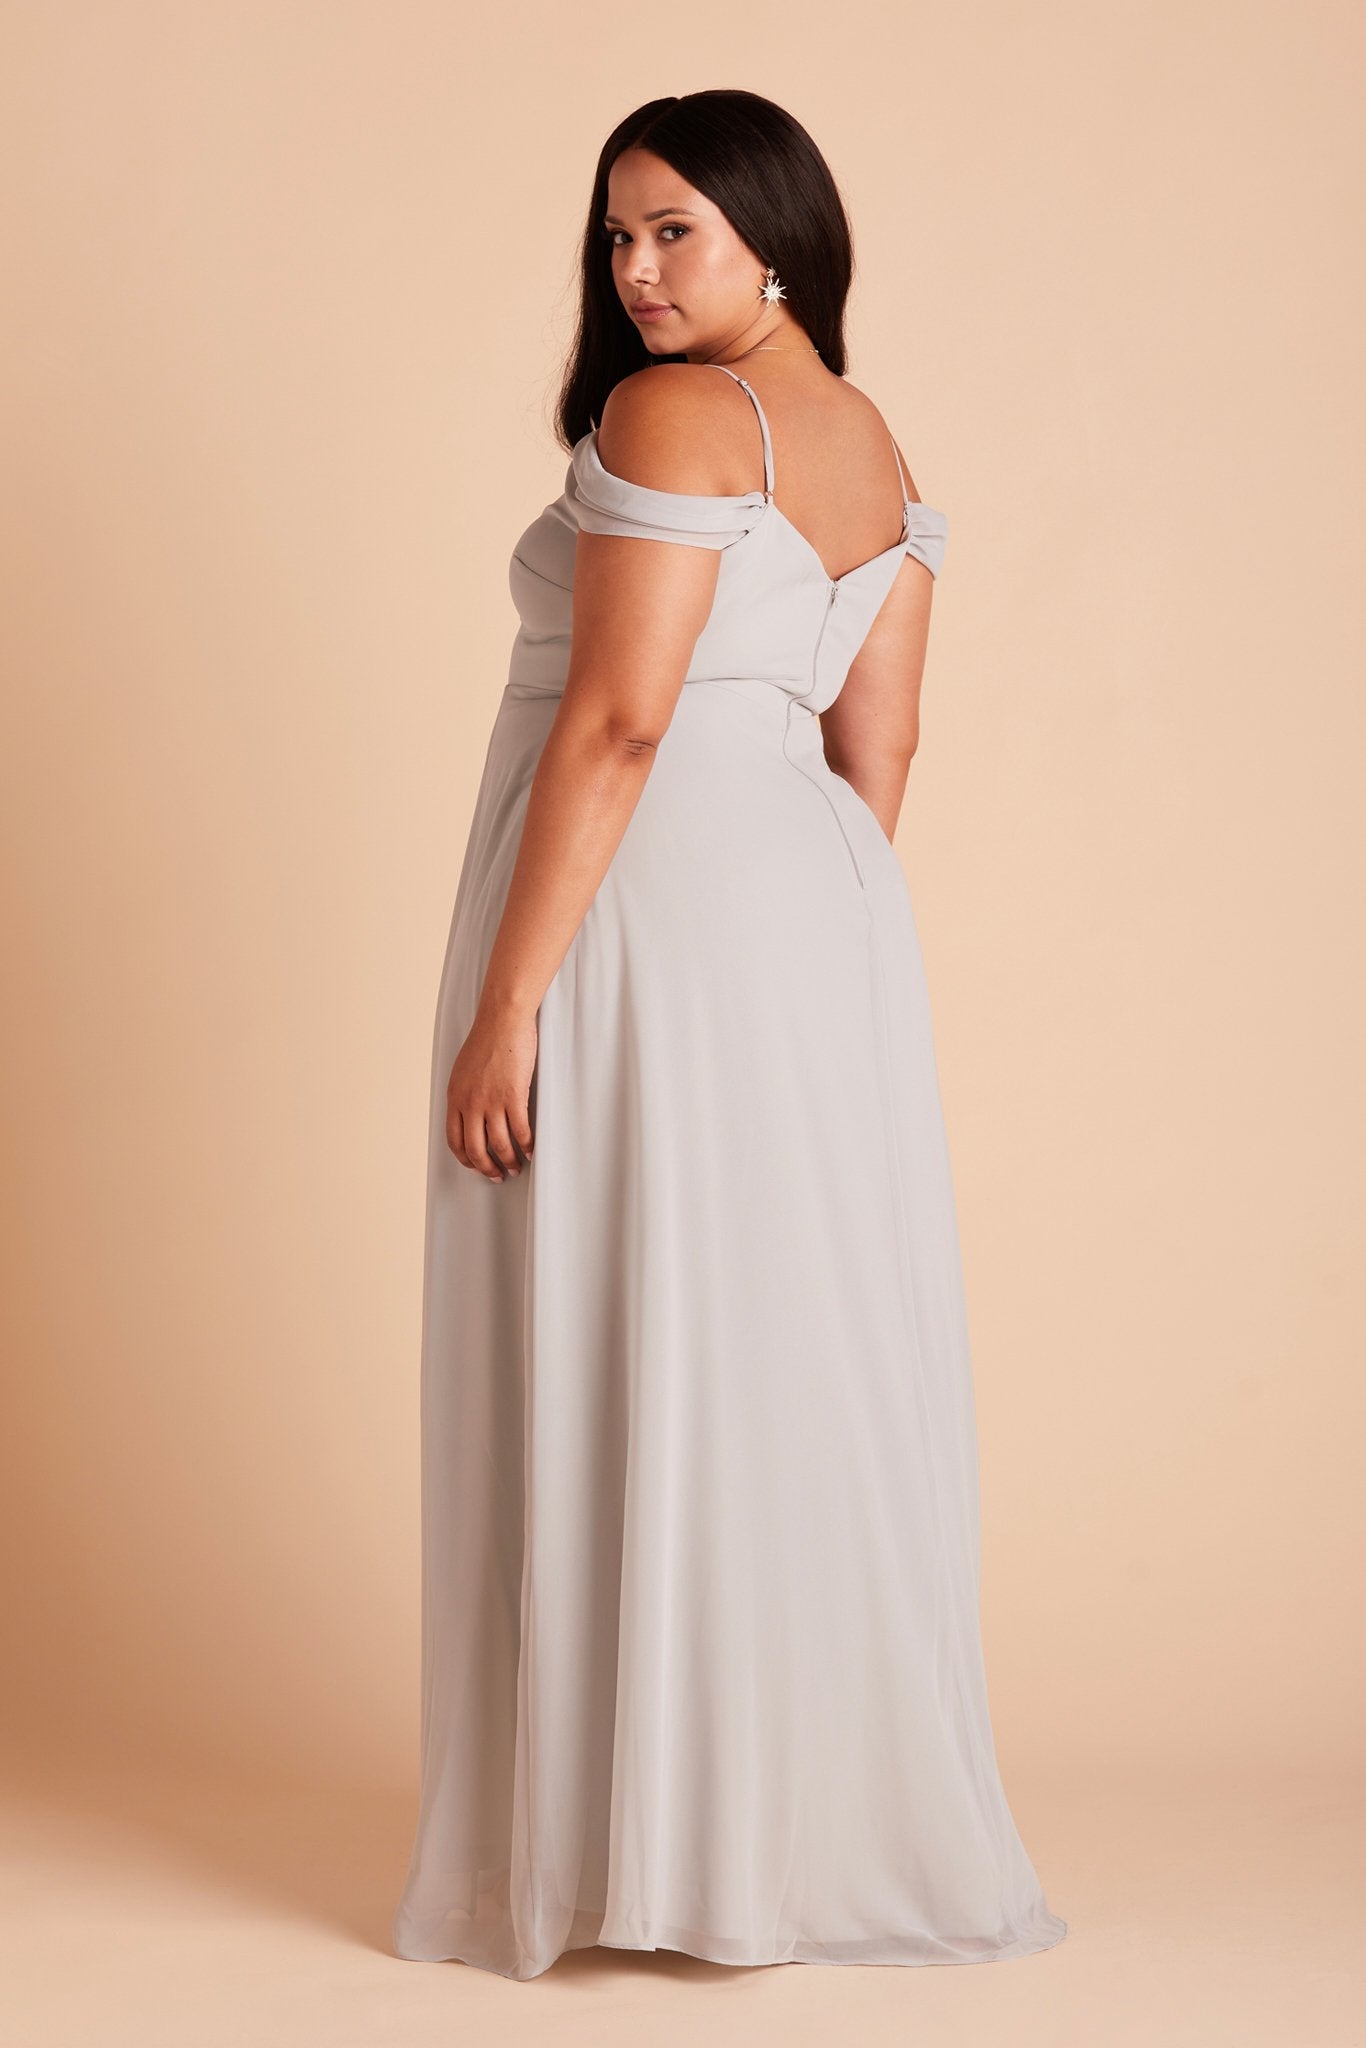 Devin convertible plus size bridesmaid dress in dove gray chiffon by Birdy Grey, side view